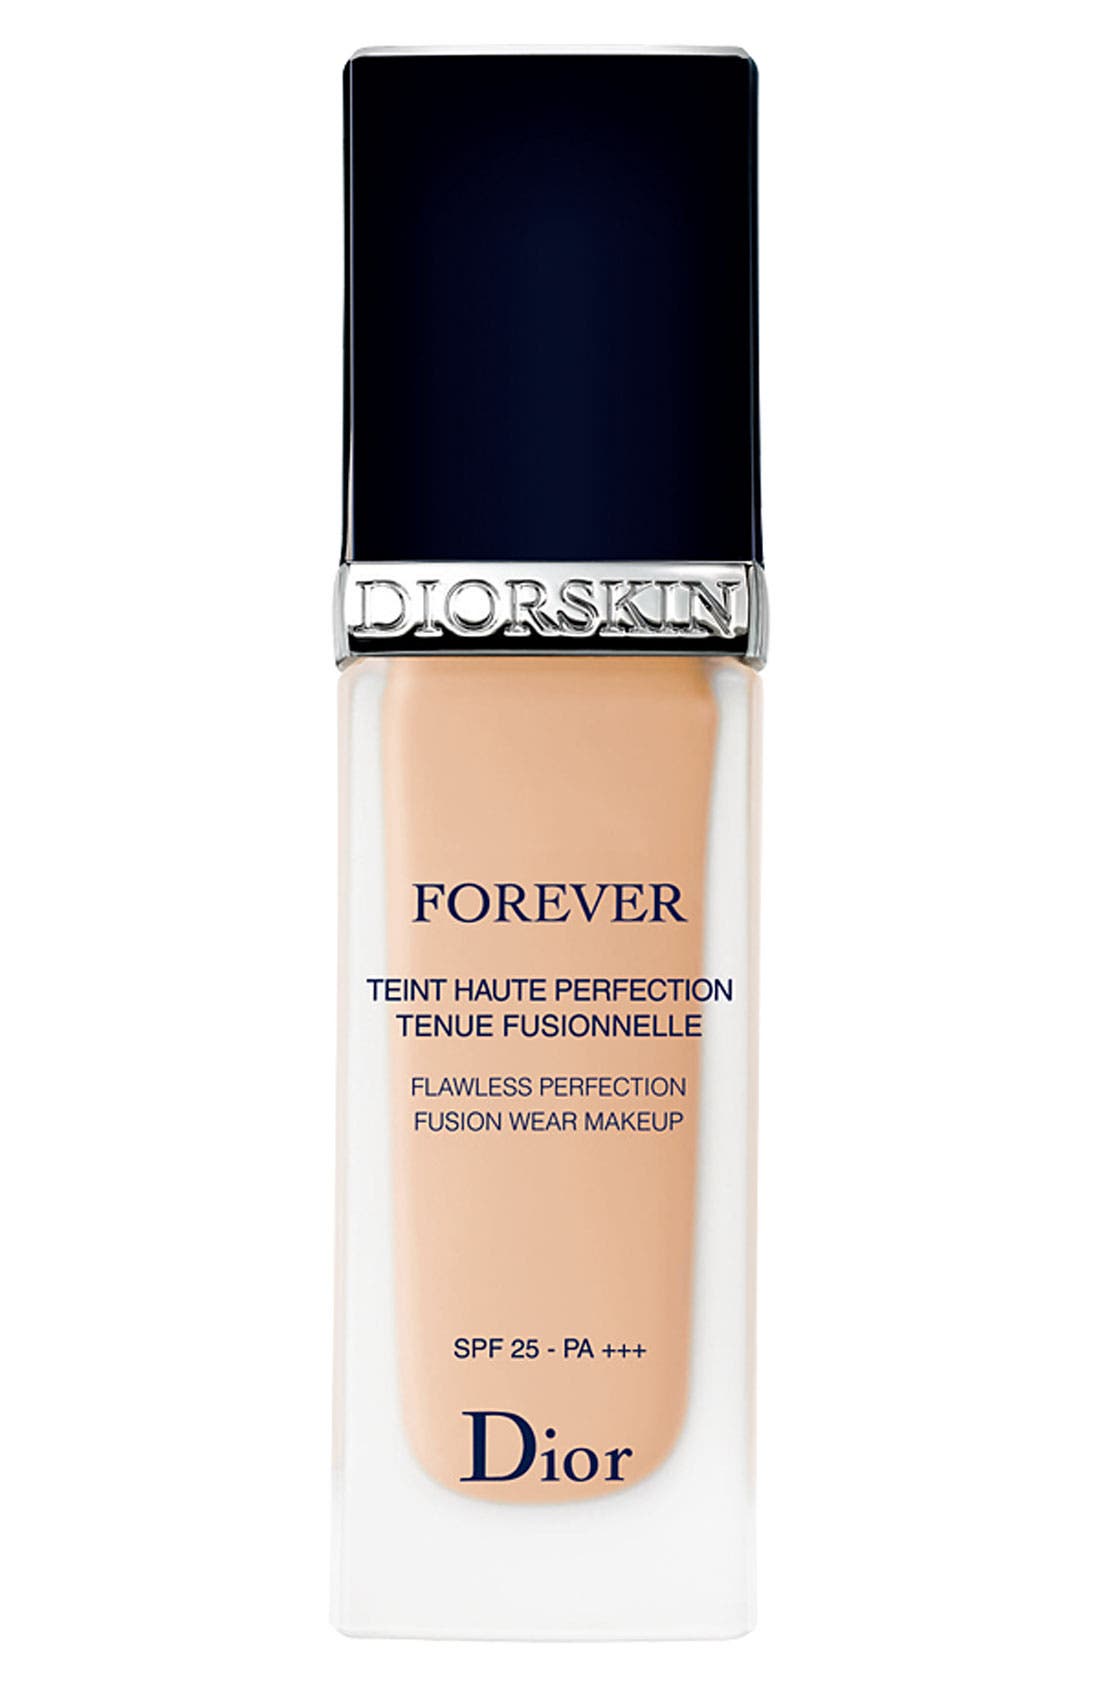 Dior 'Diorskin Forever' Fluid Flawless 